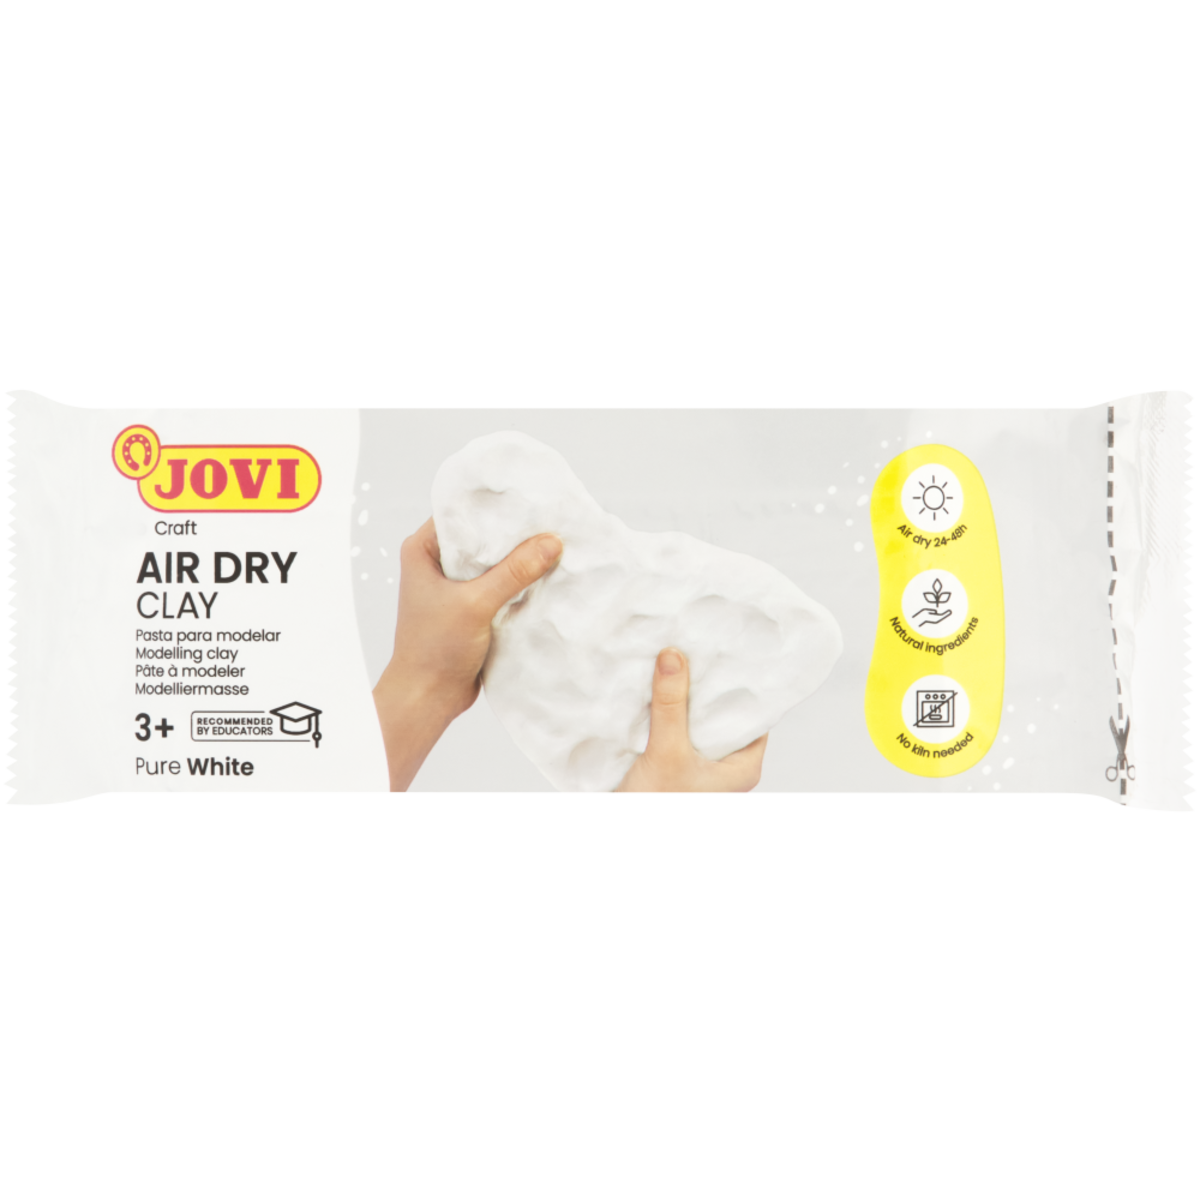 Jovi White Air Dry Modelling Clay 500g, Hobby & Craft Accessories, Hobbies & Crafts, Stationery & Newsagent, Household